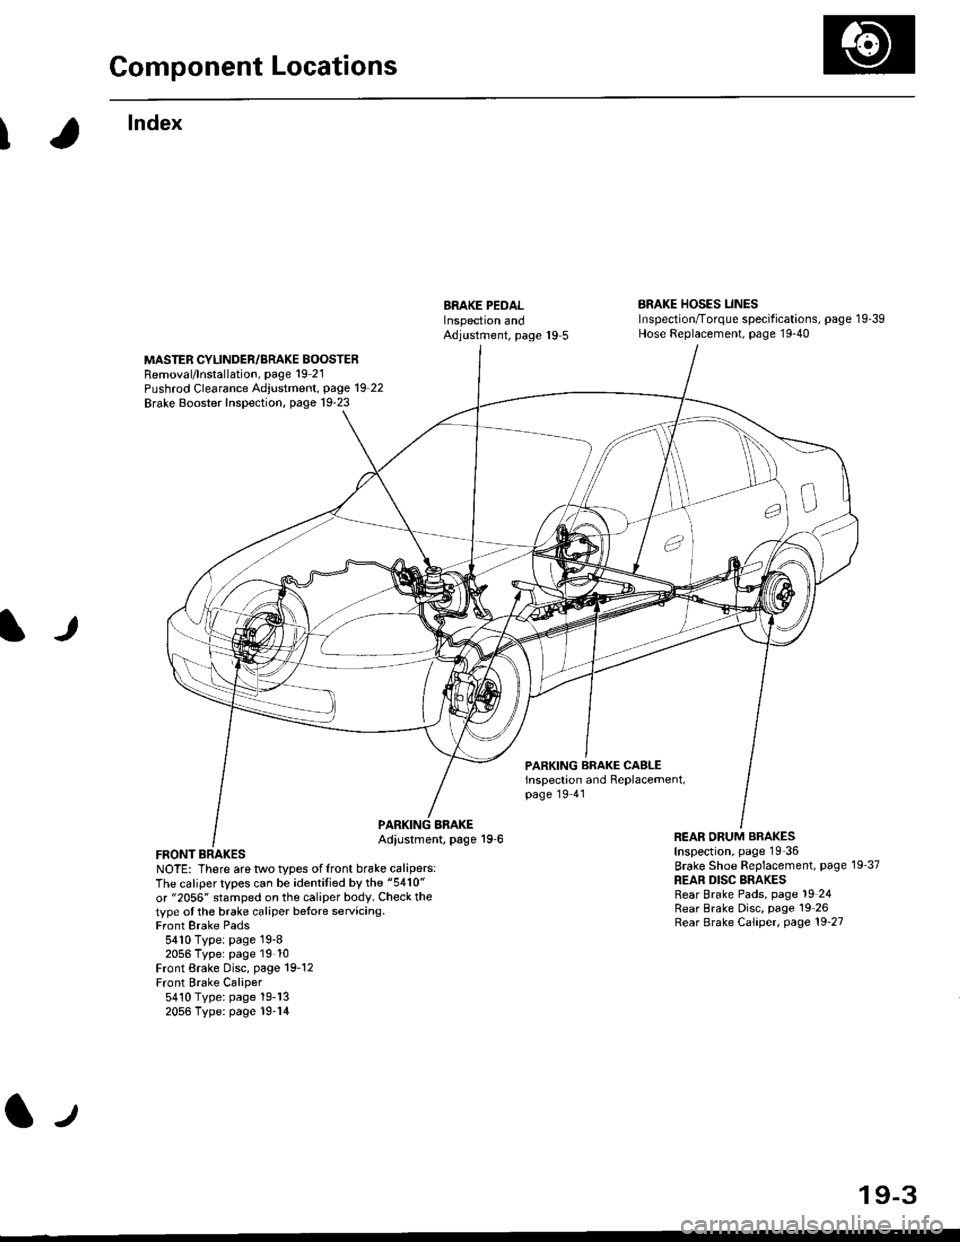 HONDA CIVIC 1997 6.G Workshop Manual Component Locations
I
lndex
ERAKE PEDALInspectron andAdjustment, page 19 5
BRAKE HOSES LINESInspection/Torque specif ications, page 1 9-39Hose Replacement, page 19-40
MASTER CYLINDER/BRAKE BOOSTERRemo